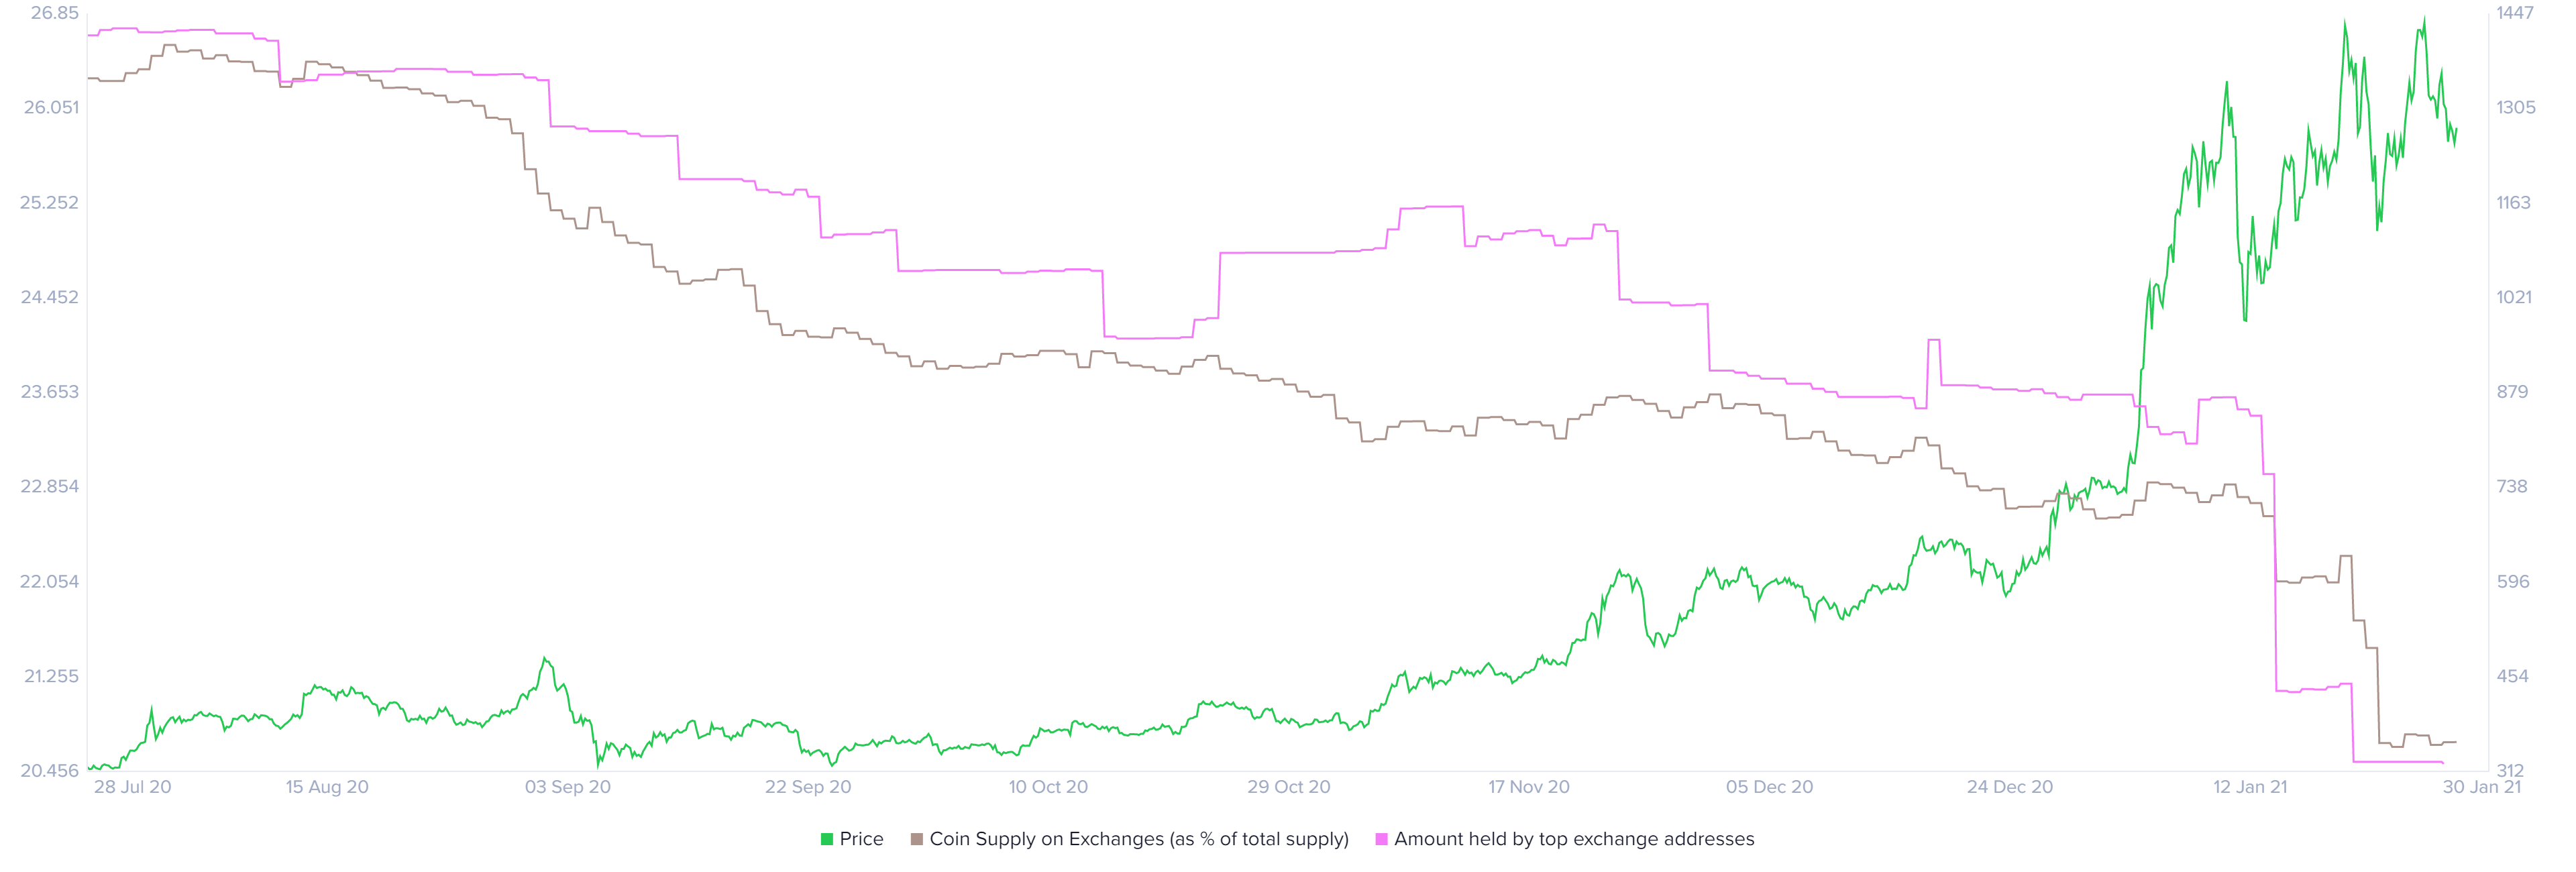 Ethereum coin supply on exchange/amount held by top exchange addresses chart